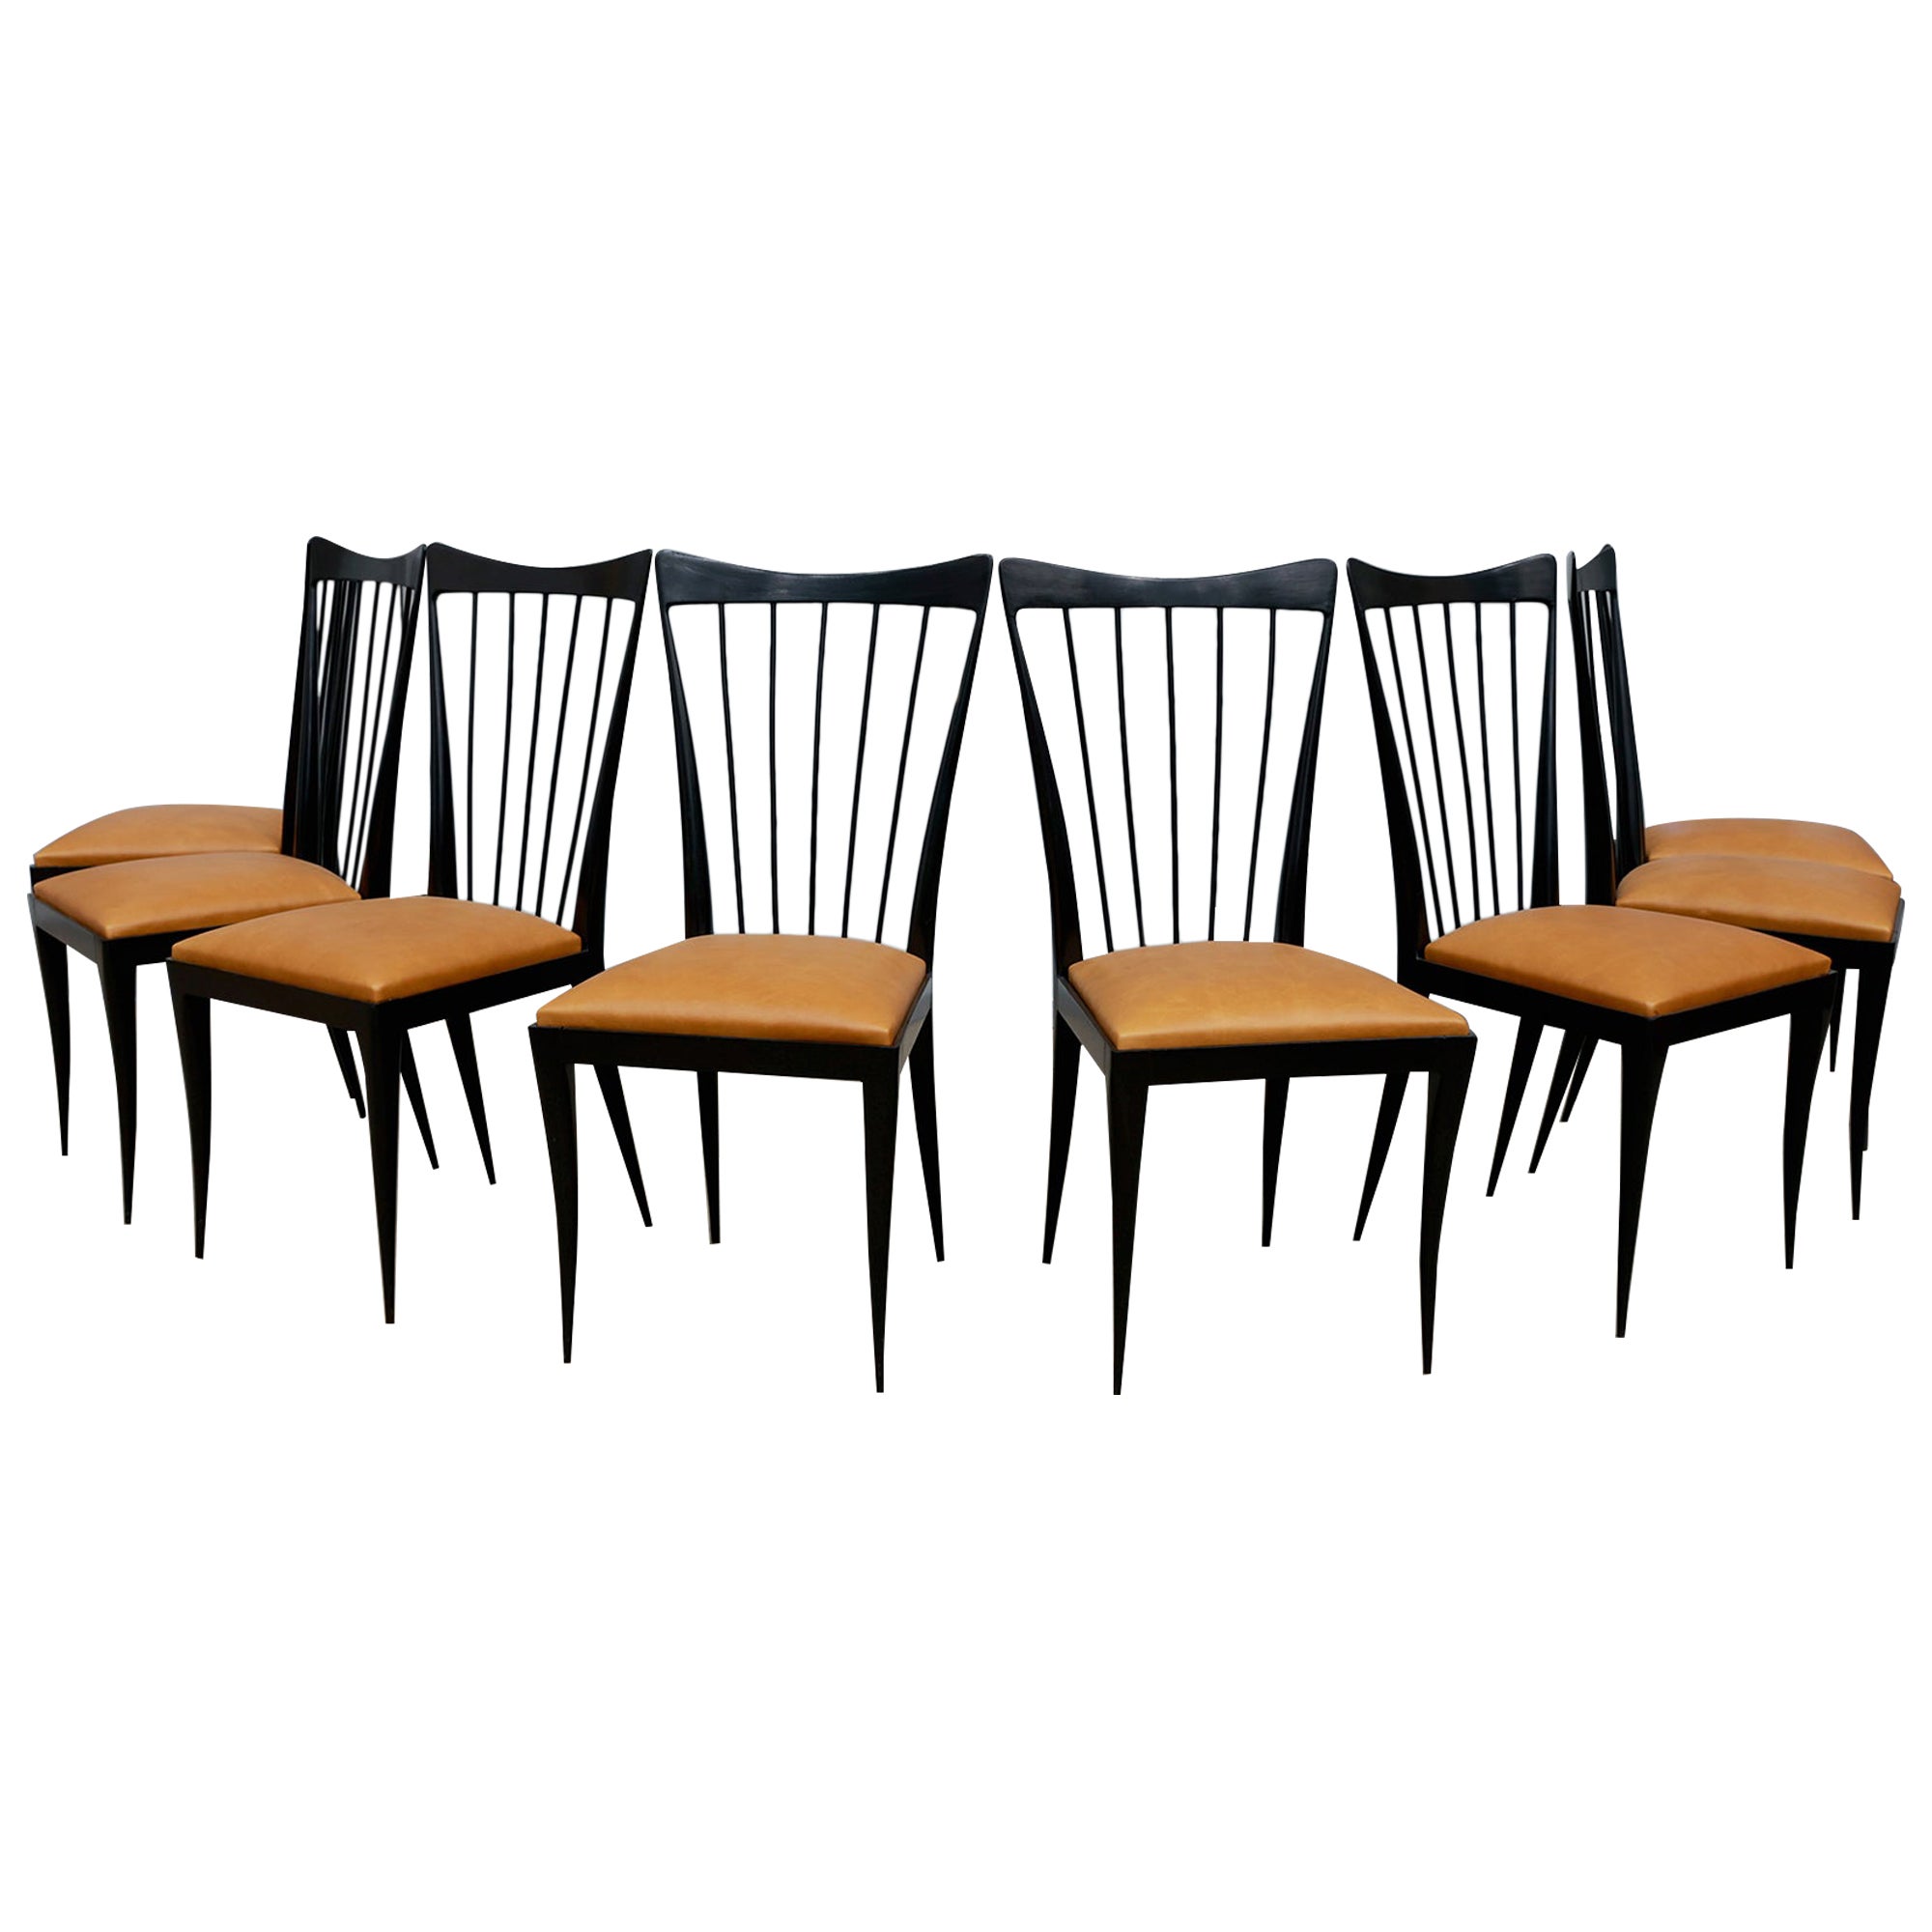 Available today, this set is nothing less than spectacular!

This set of eight dining chairs was designed by Giuseppe Scapinelli in the 1950s. The structure of the chairs is in hardwood with an ebony finish. The sculpted back and legs are typical of